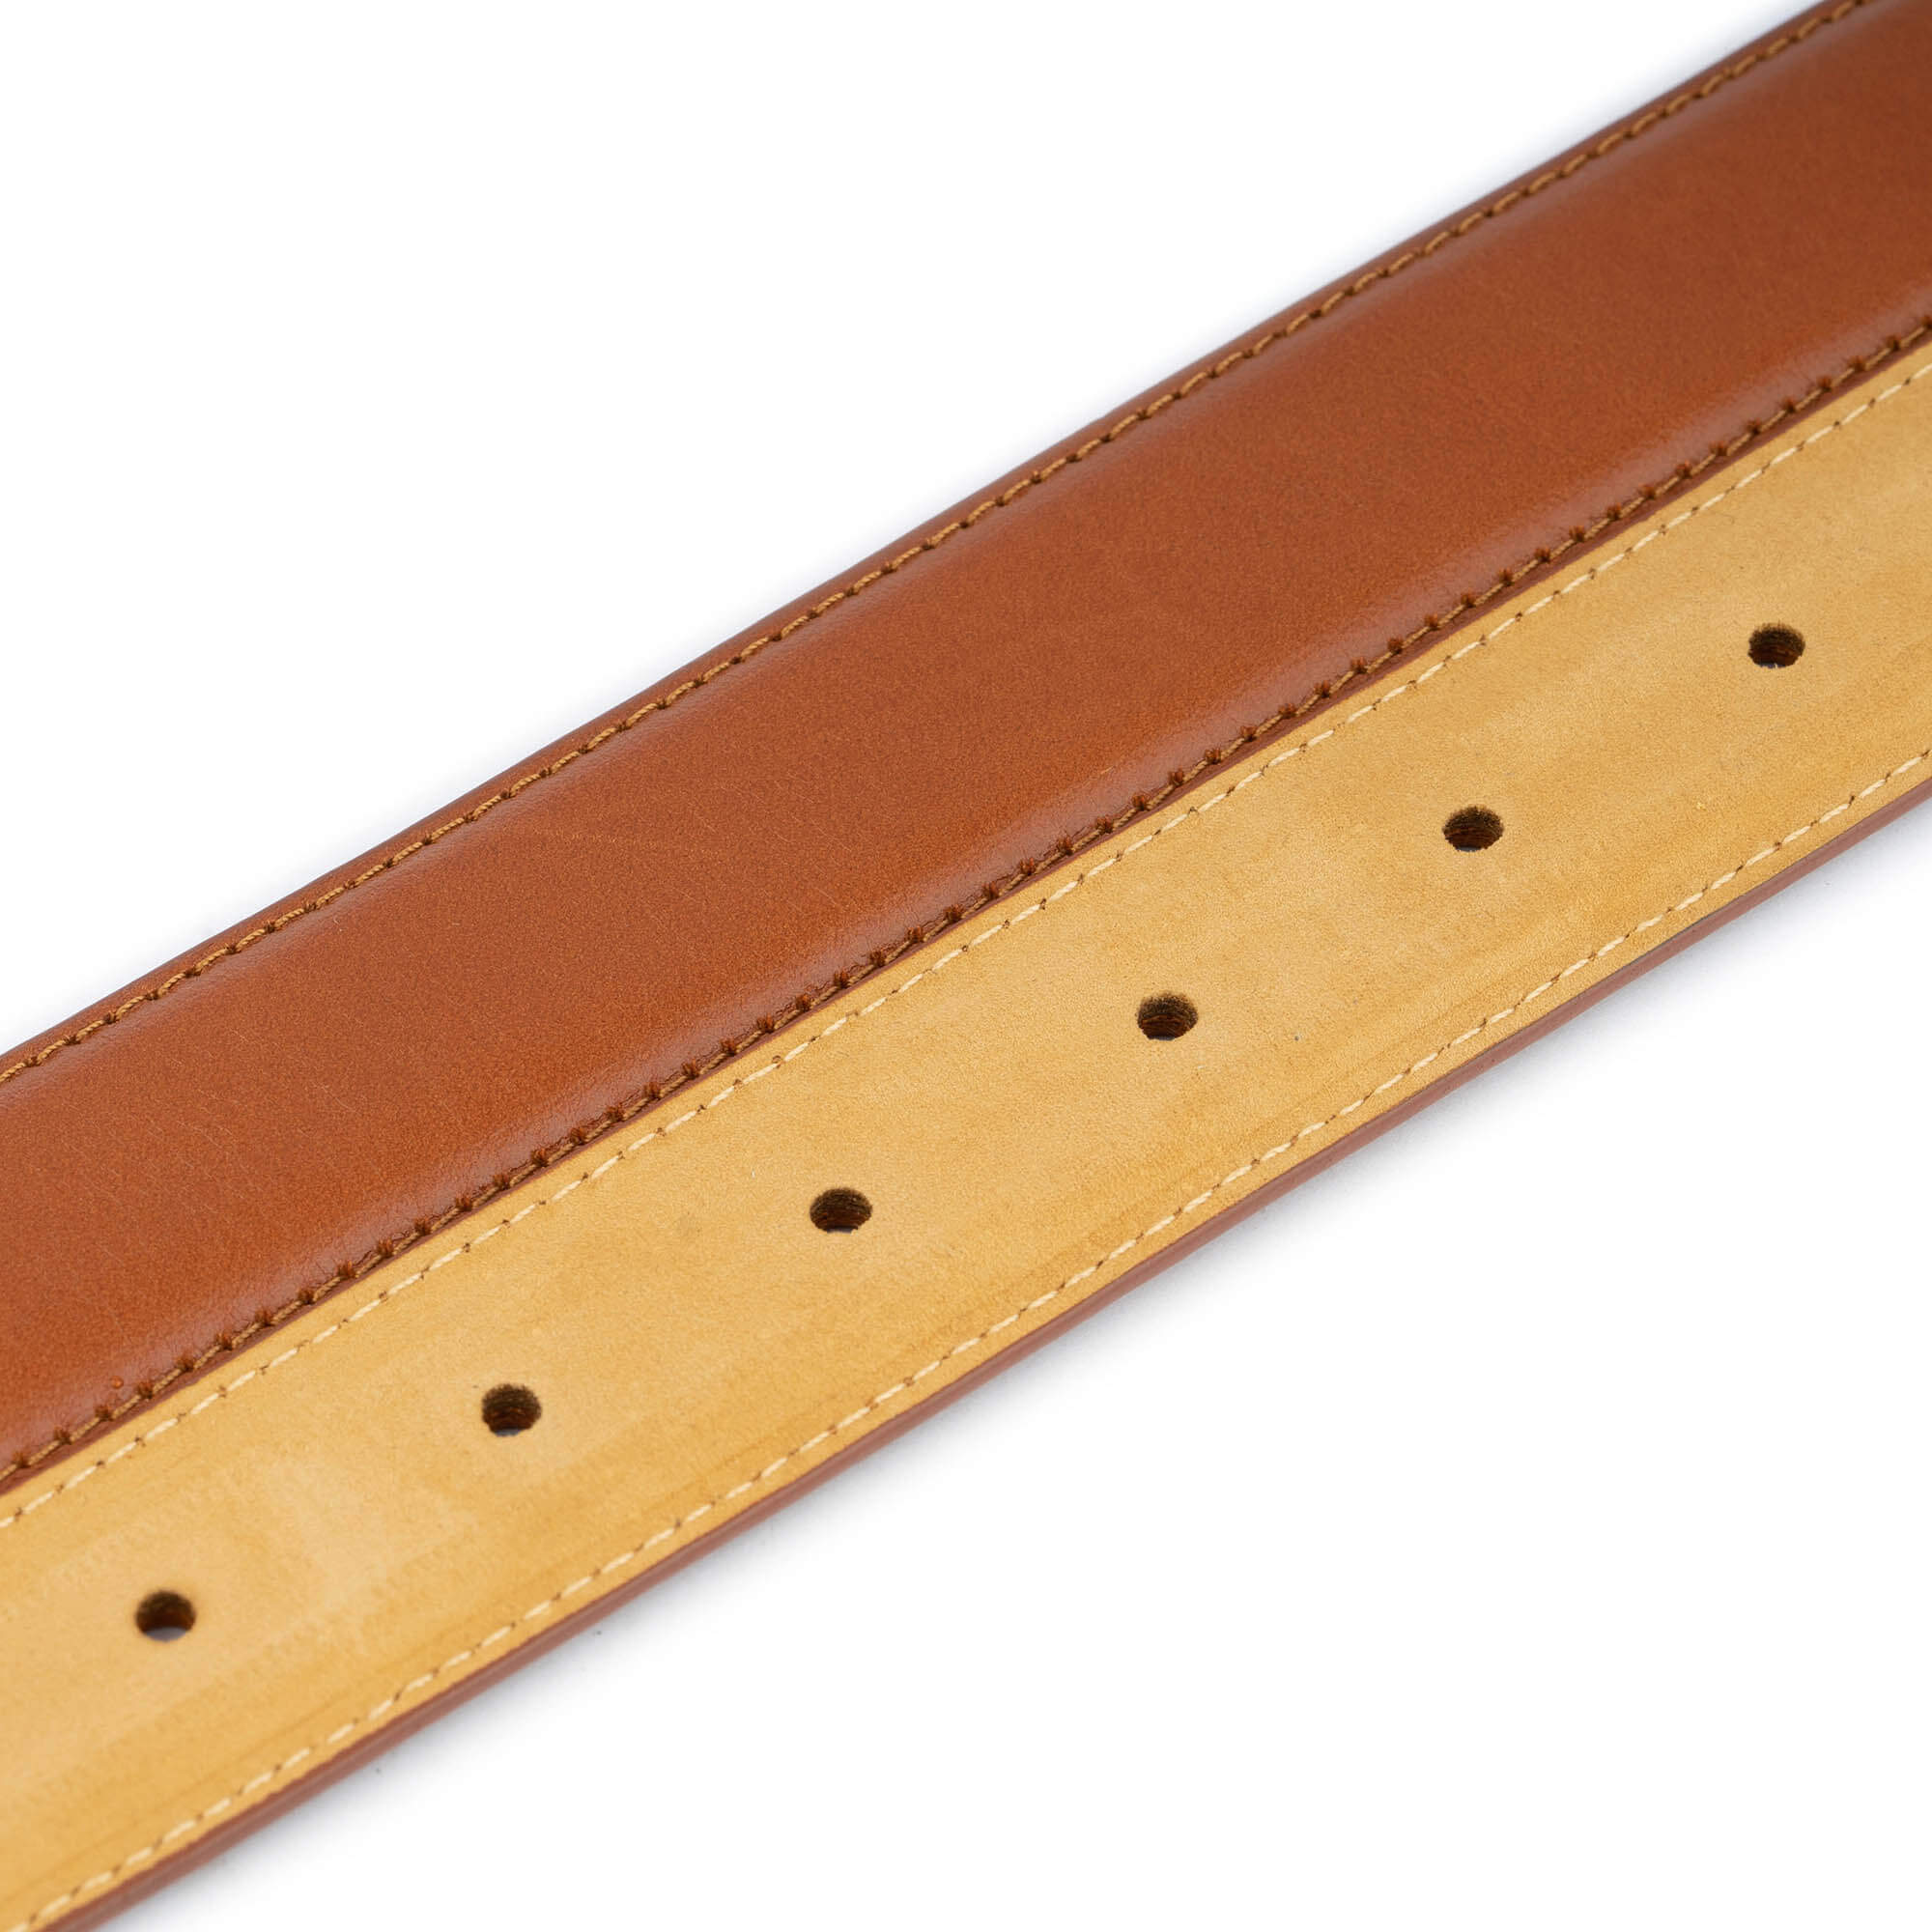 Buy Light Brown Tan Belt Leather Strap Replacement 3.0 Cm 